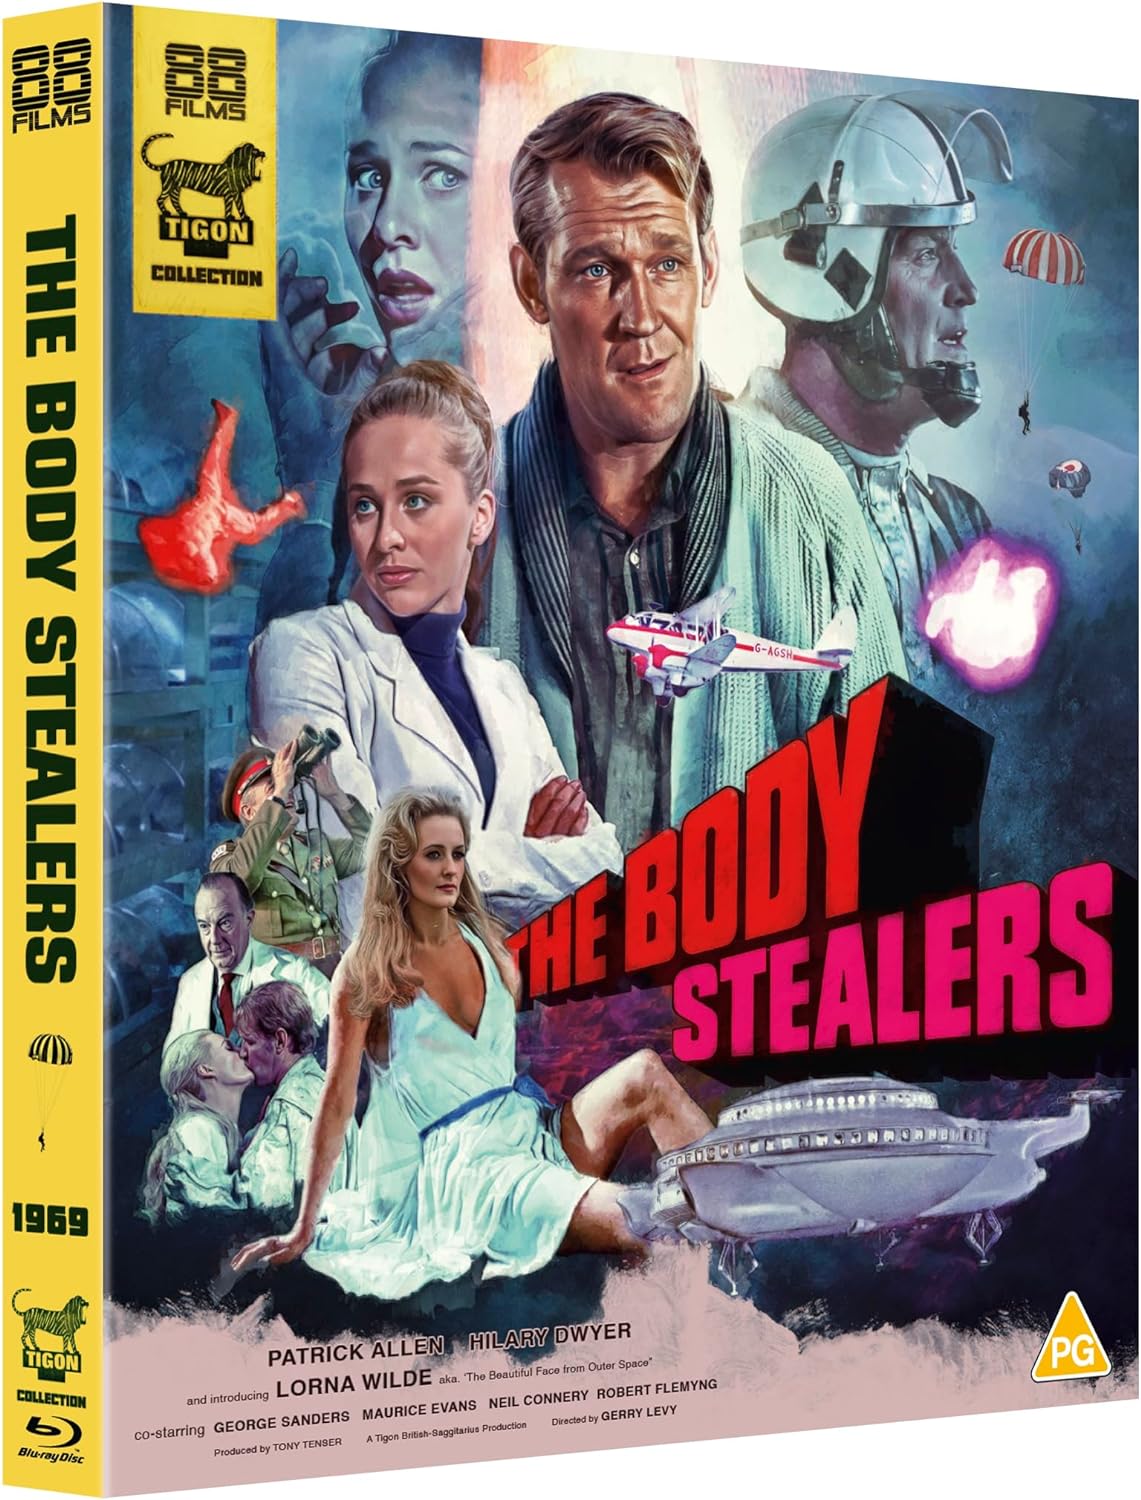 The Body Stealers Blu-ray with Slipcover (88 Films/Region B) [Preorder]